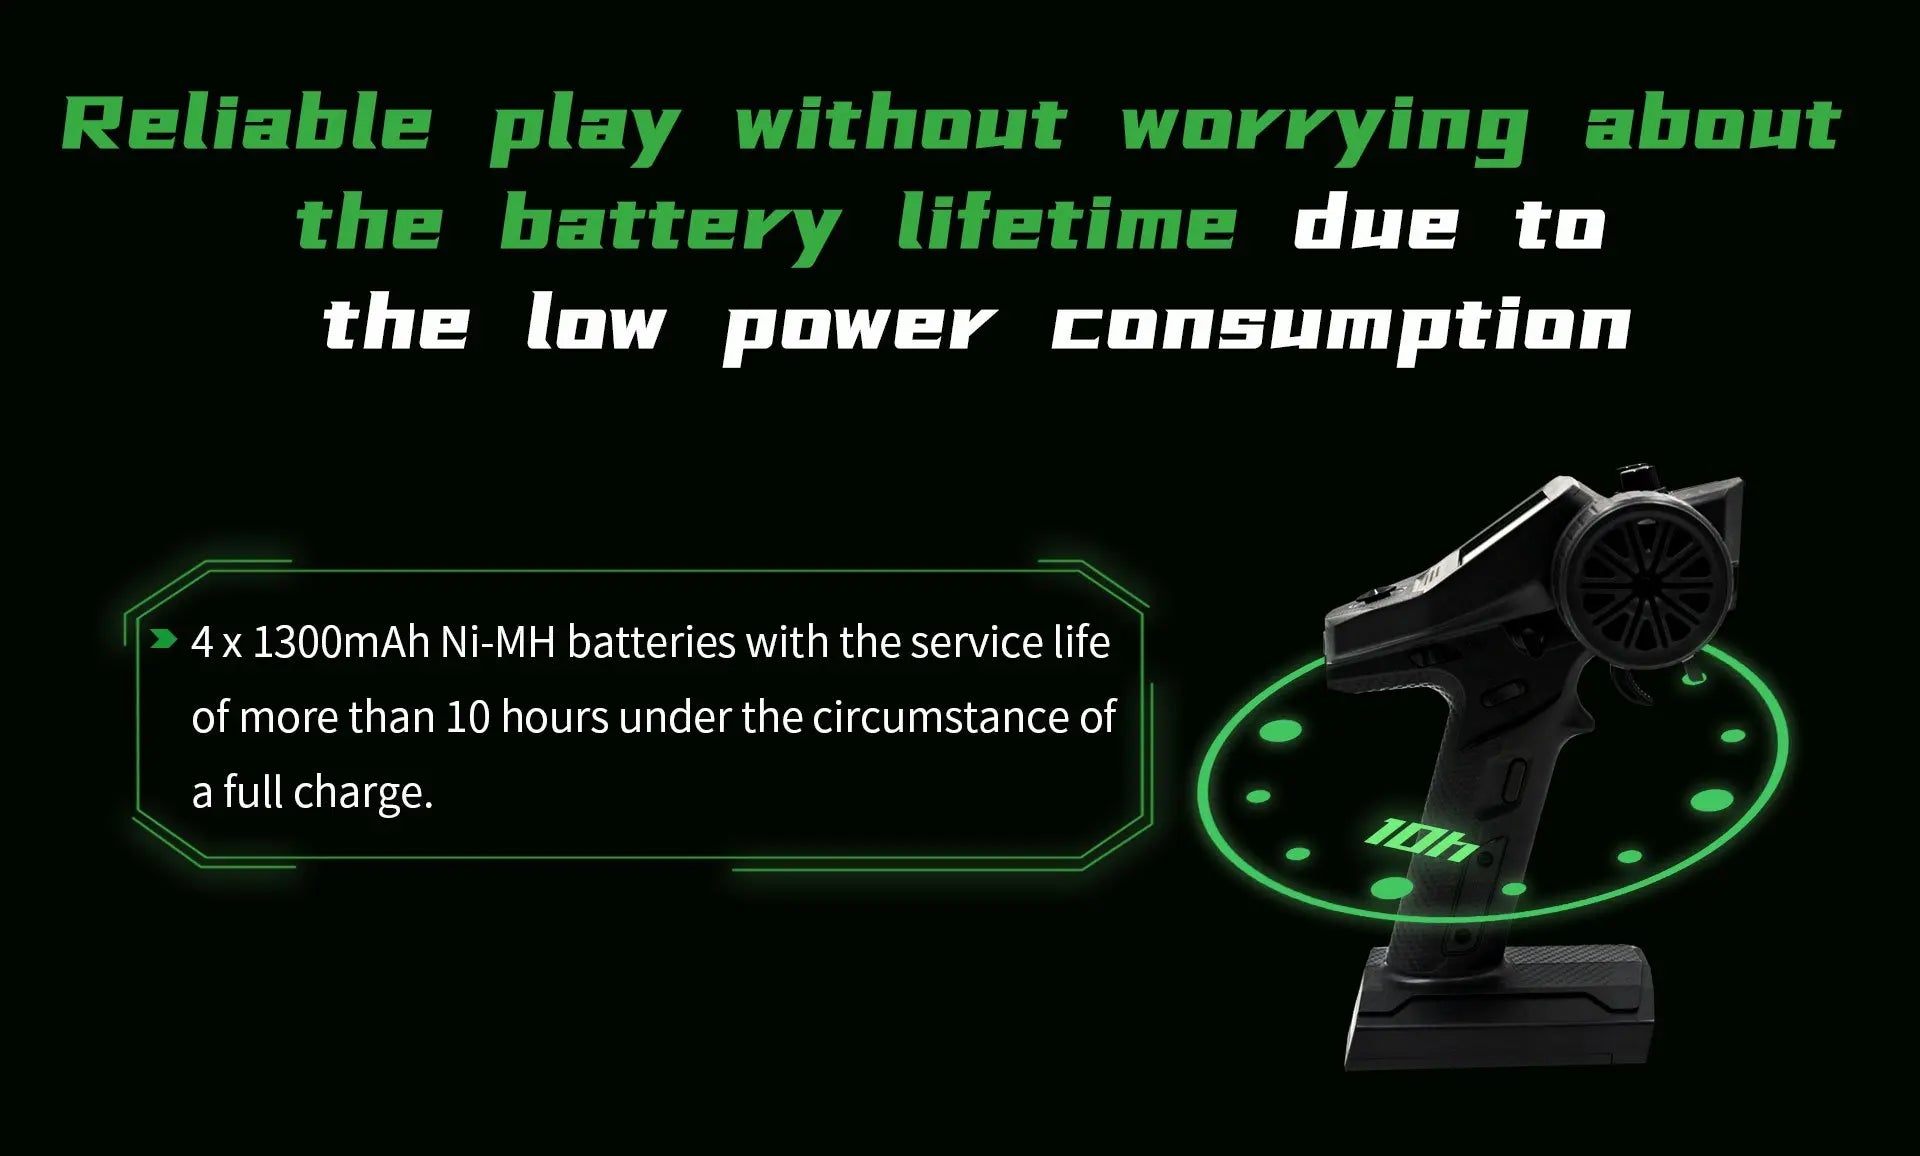 4x 1300mAh Ni-MH batteries with the service life of more than 10 hours under